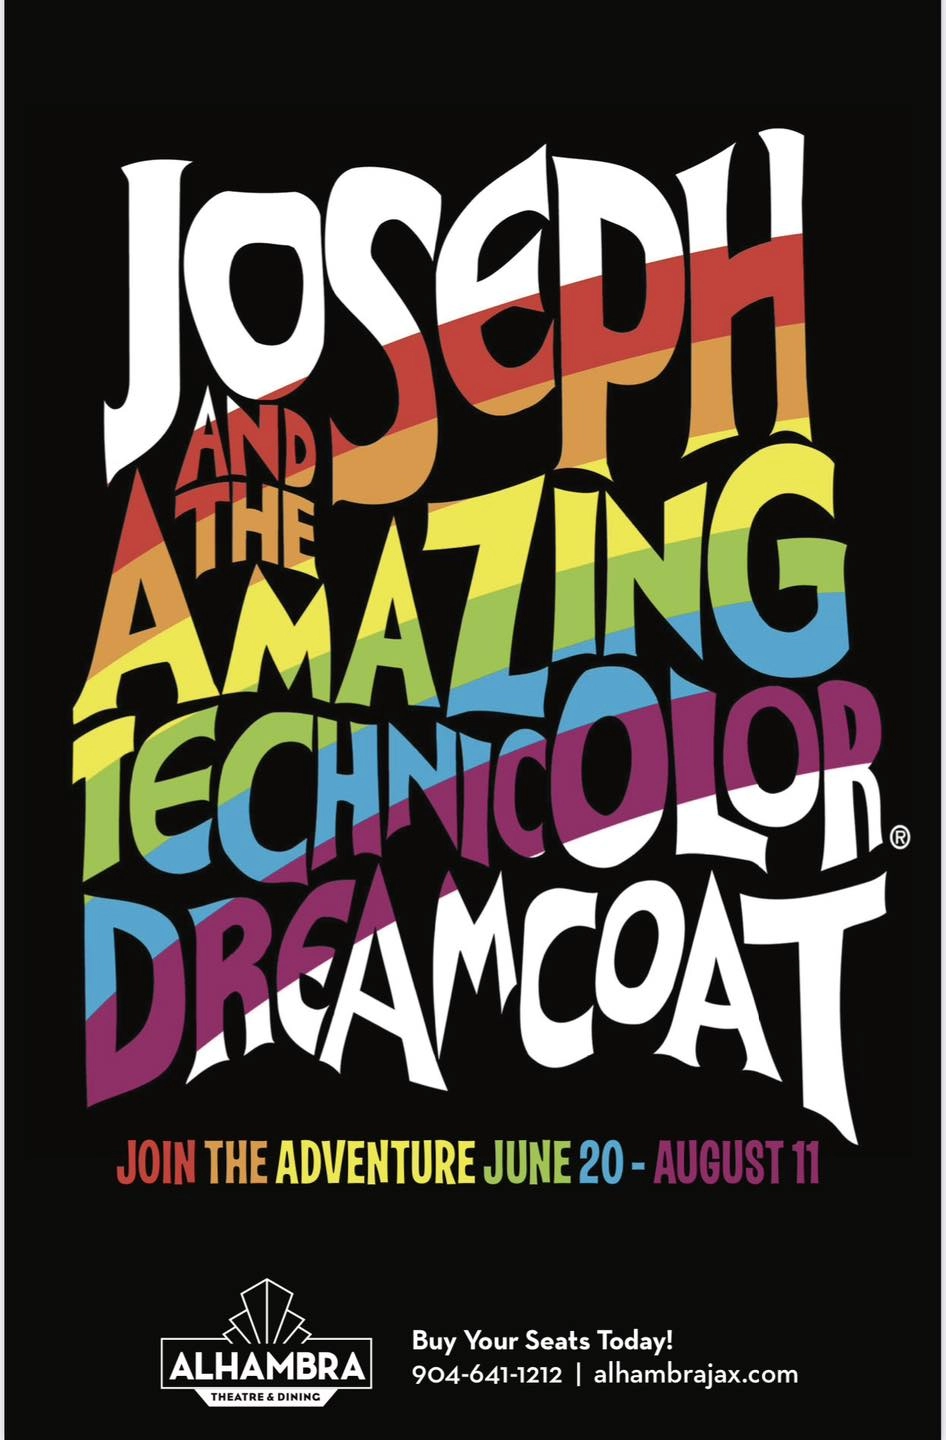 image from Joseph and the Amazing Technicolor Dreamcoat